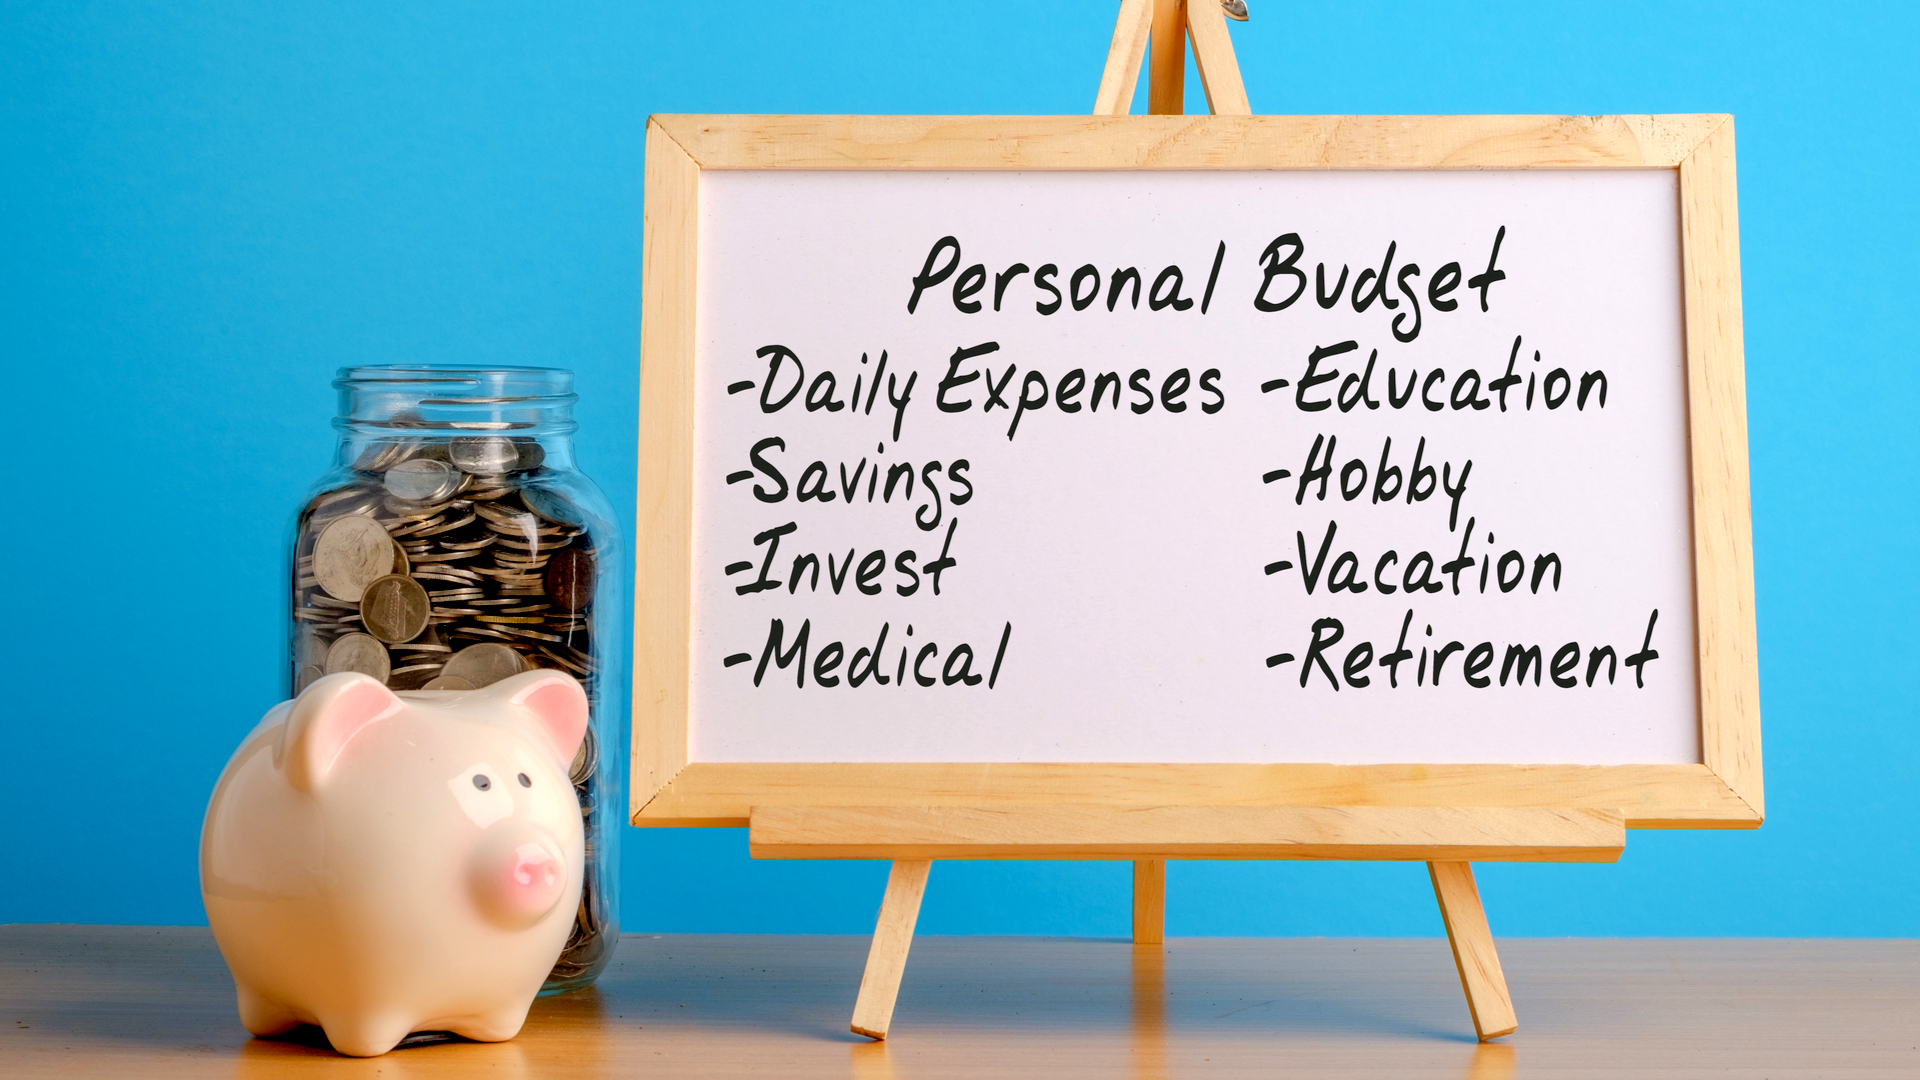 An image of a piggy bank, a jar filled with coins and a board titled Personal Budget. Listed on the board are Daily Expenses, Savings, Invest, Medical, Education, Hobby, Vocation and Retirement. Budgeting strategies with the ratios